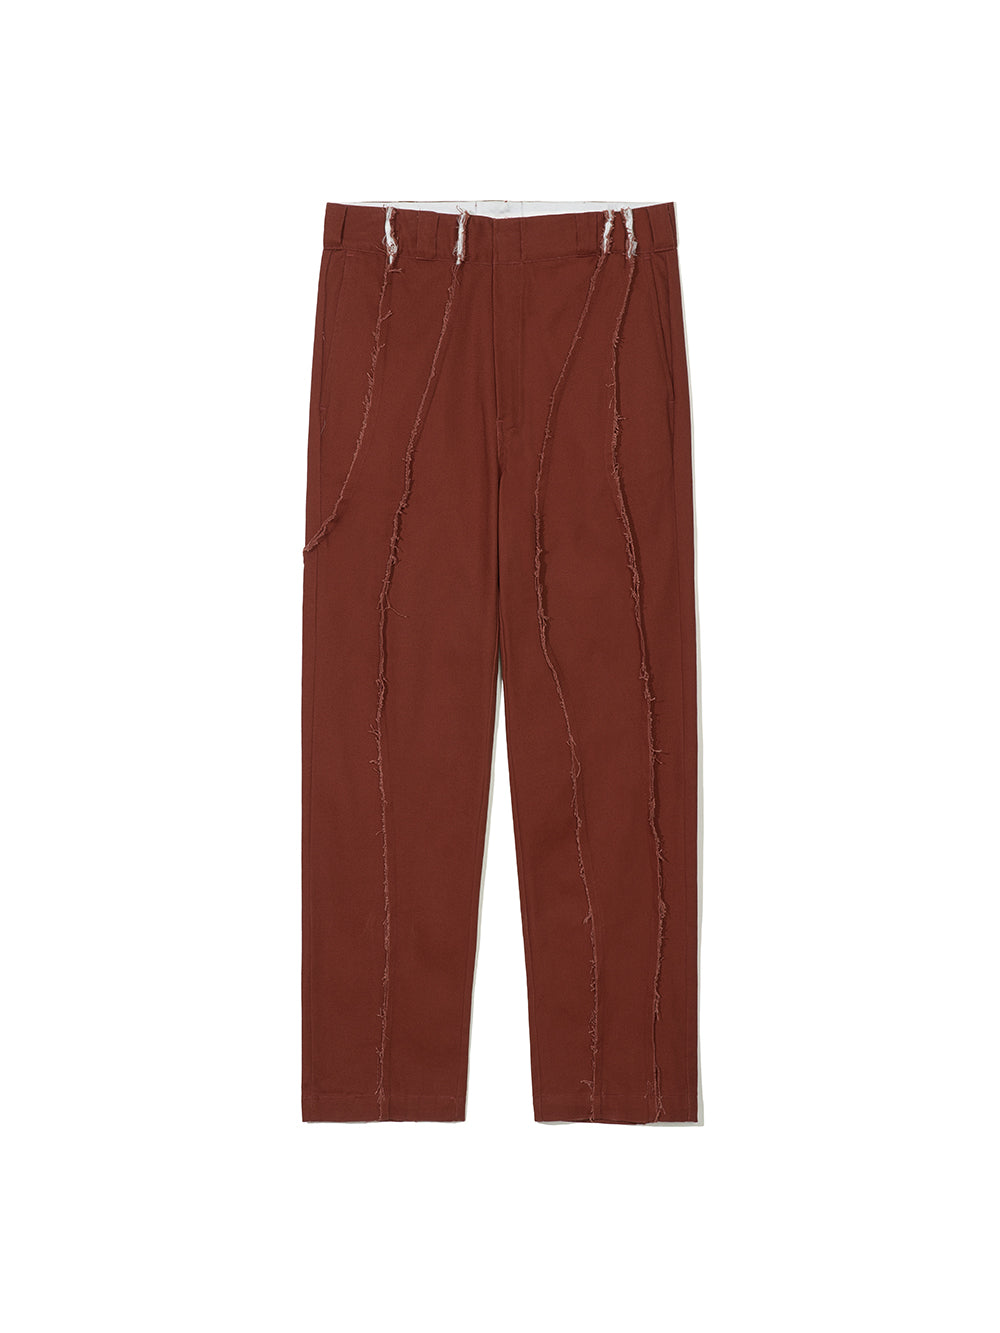 Curved Cut-off Chino Pants in Burnt Orange